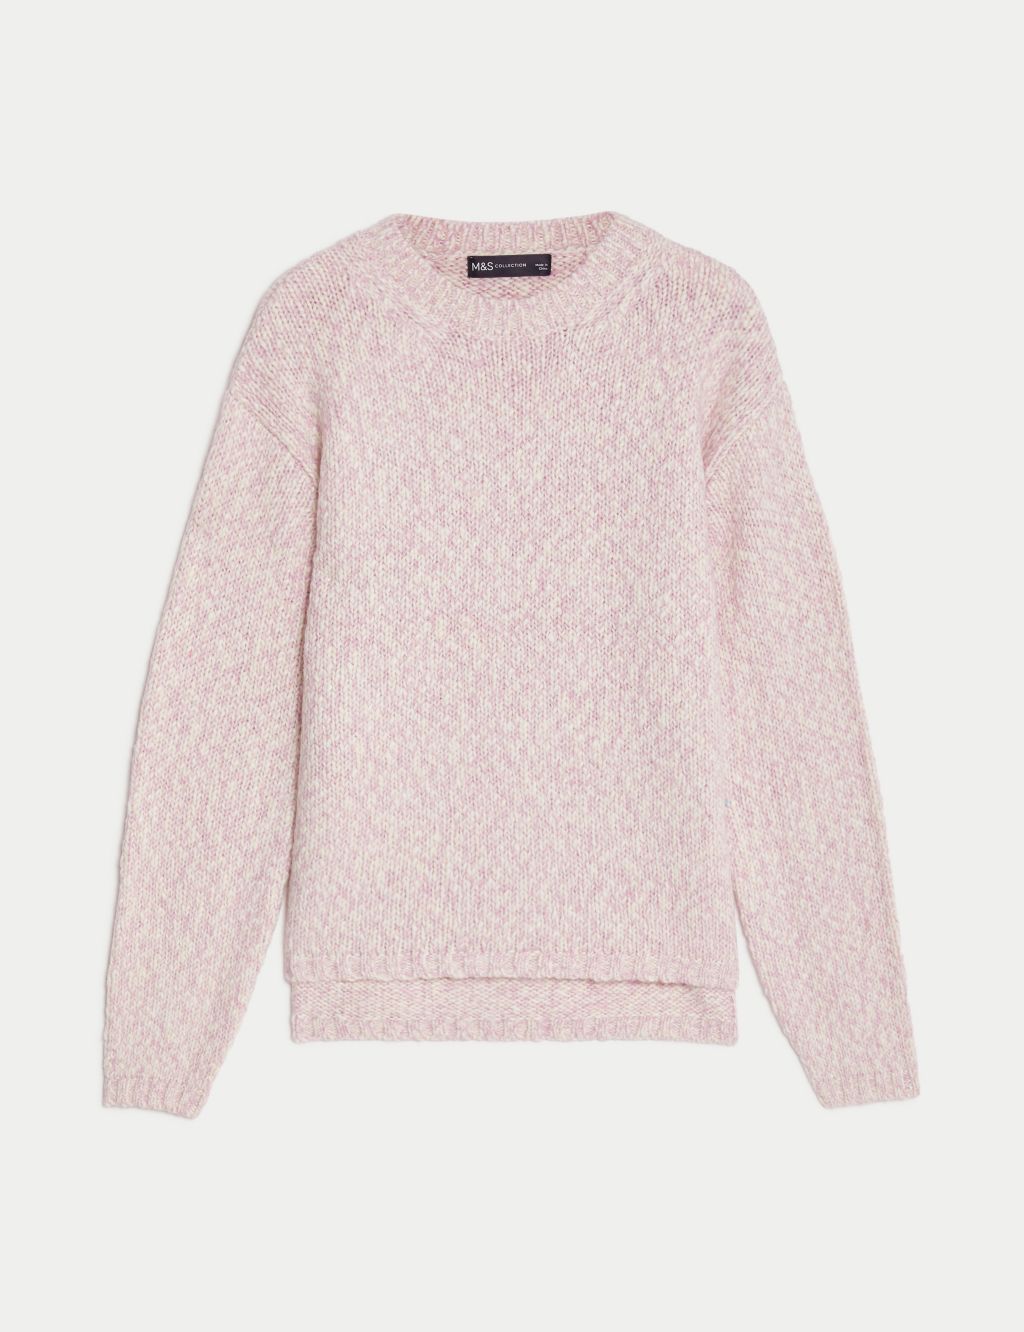 Textured Crew Neck Jumper with Wool image 2